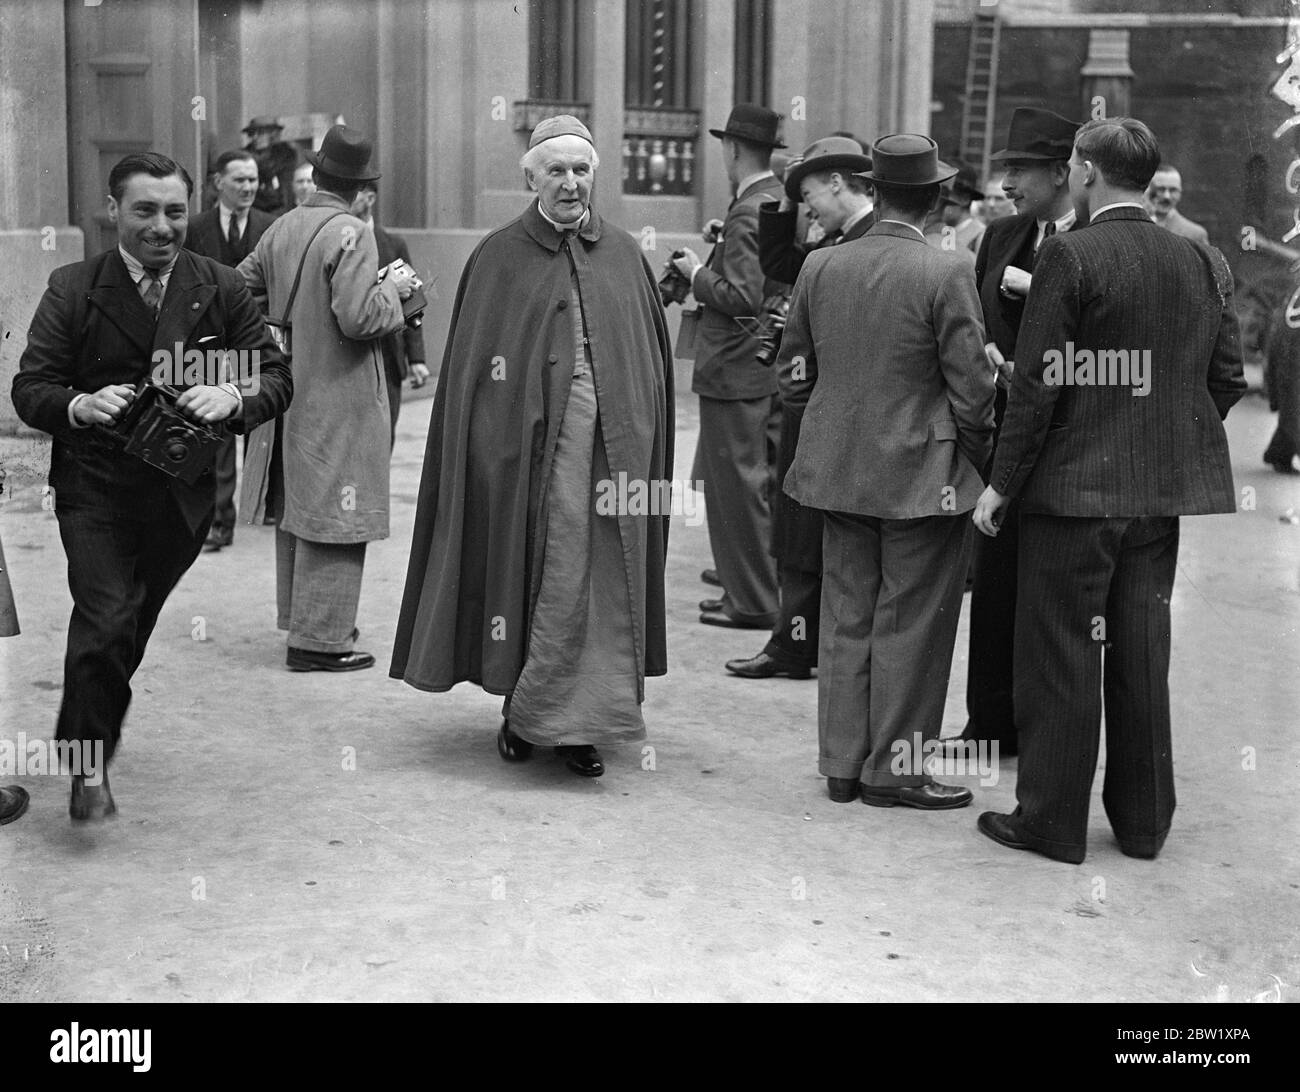 Archbishop of Canterbury leaves after final Coronation rehearsal. Photo shows: Archbishop of Canterbury, Dr Cosmo Gordon Lang, leaving in his robes after attending the final rehearsal of the Coronation ceremony in Westminster Abbey. Dr Lang will conduct the Coronation service and will place the Crown on the King's head. 10 May 1937 Stock Photo